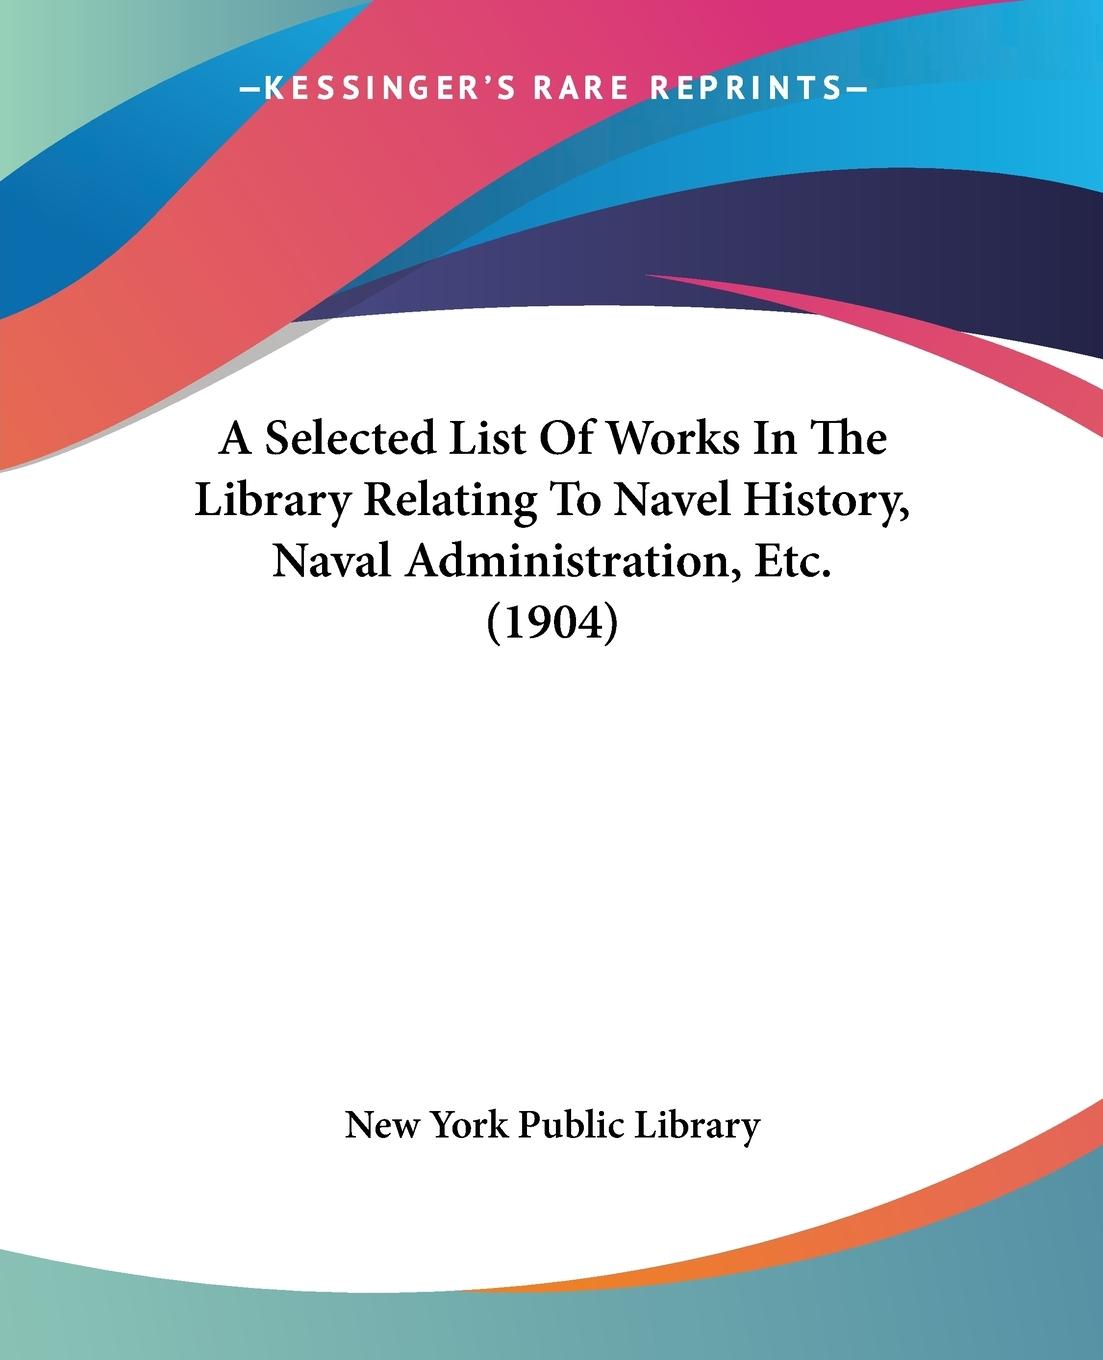 A Selected List Of Works In The Library Relating To Navel History, Naval Administration, Etc. (1904) - New York Public Library